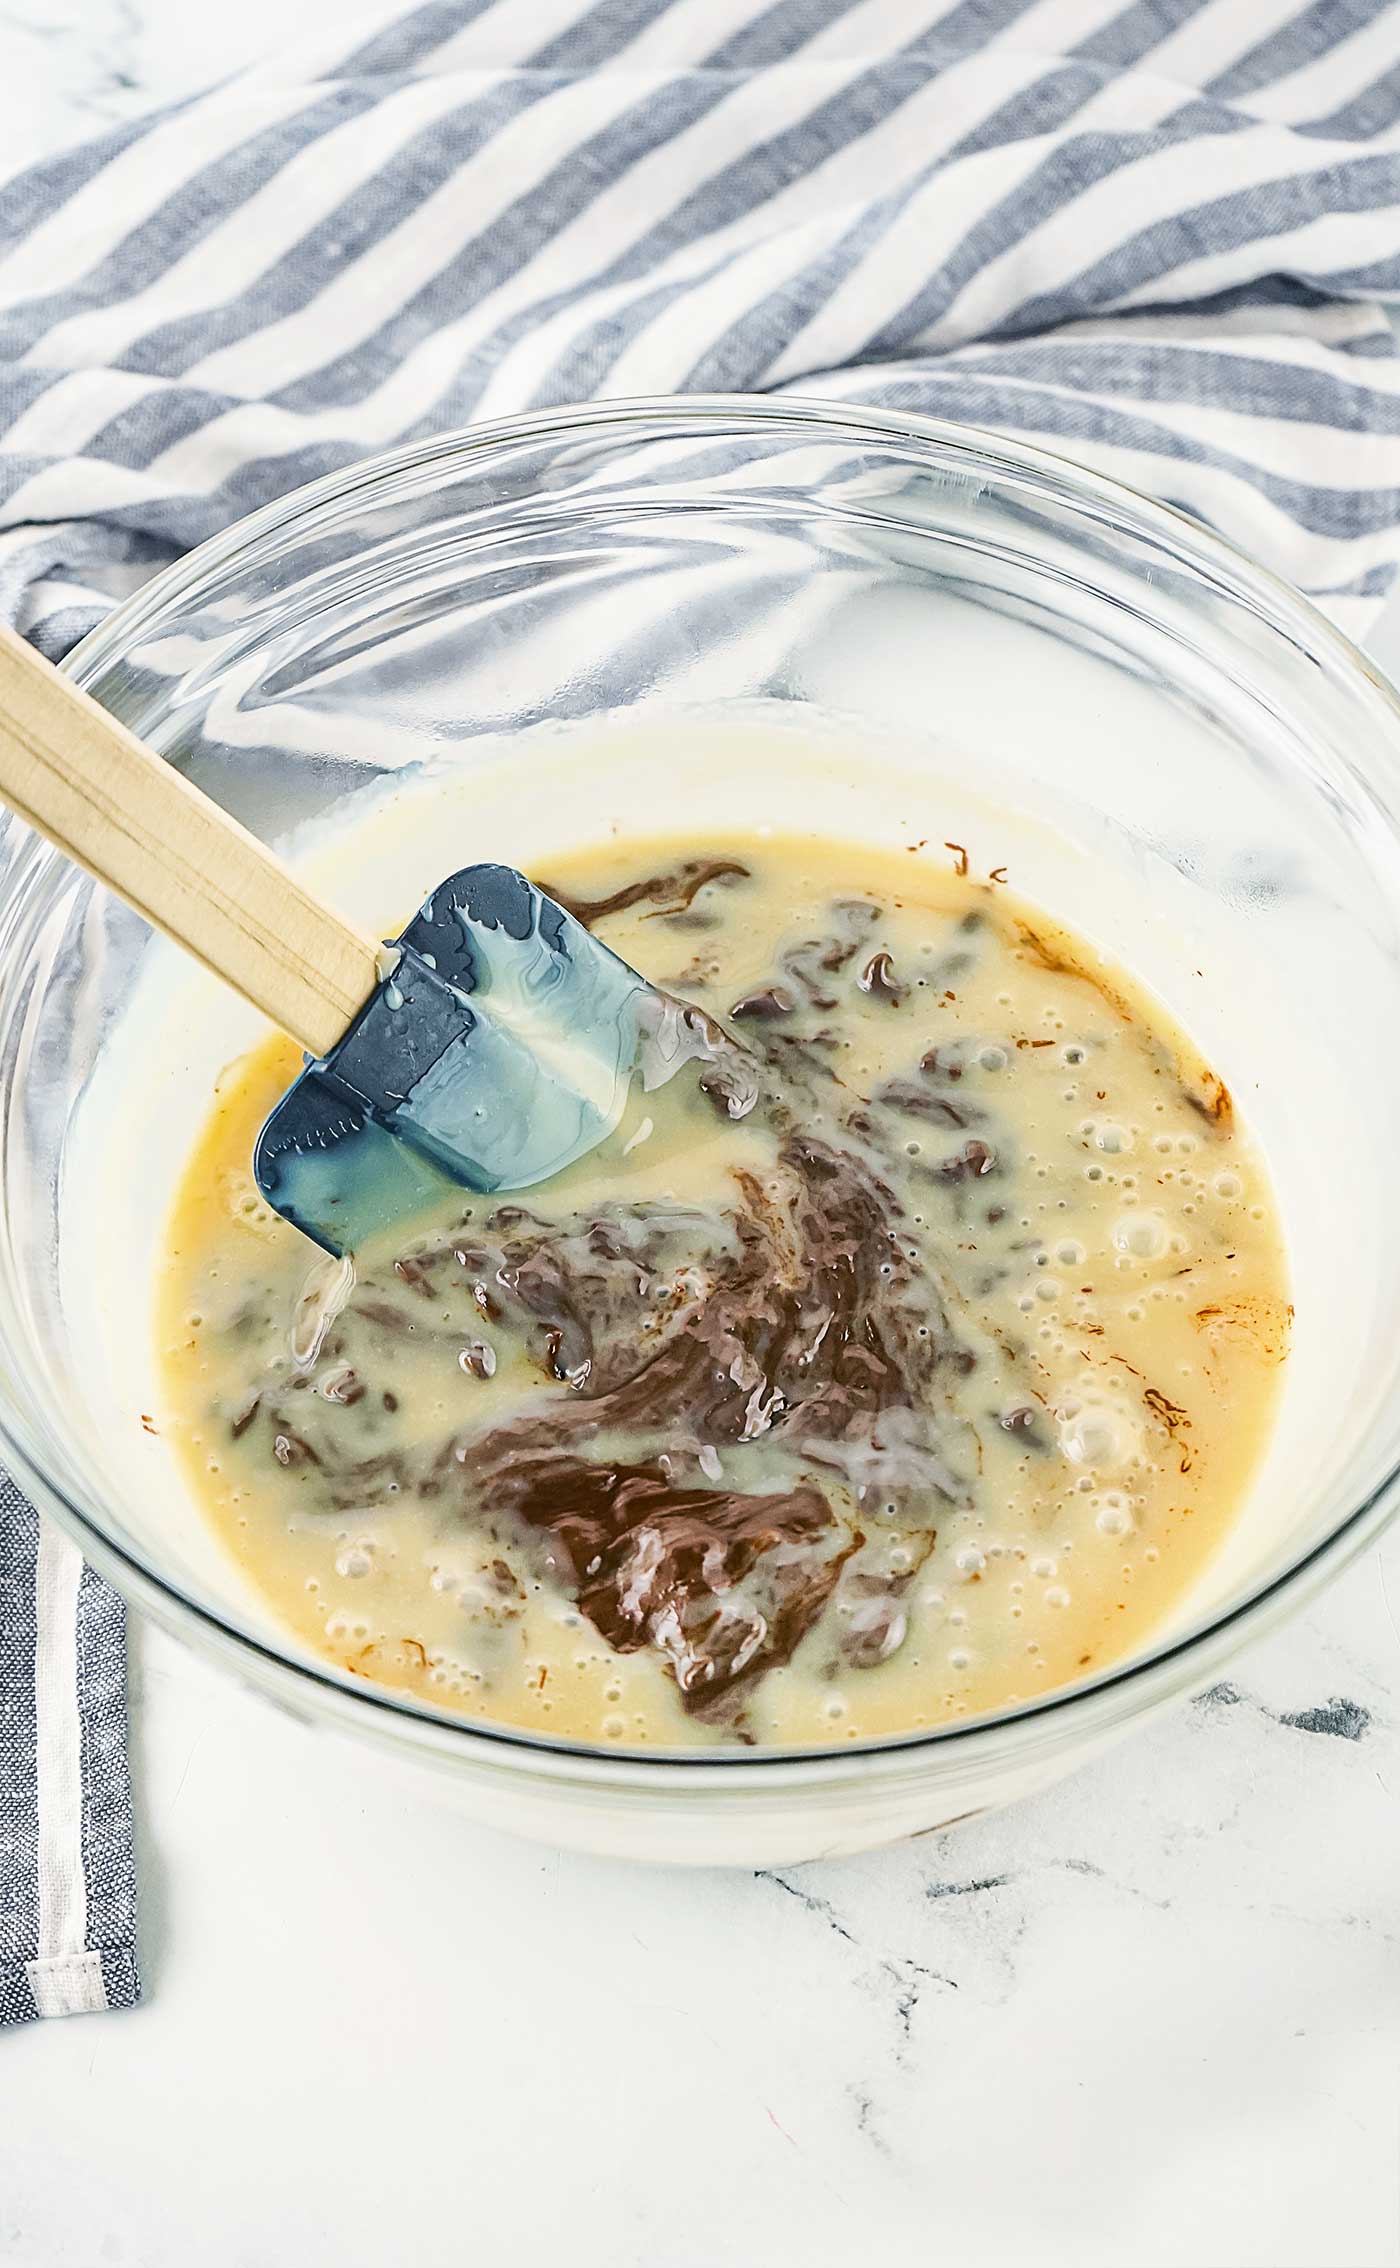 Stirring Condensed Milk and Chocolate Chips together